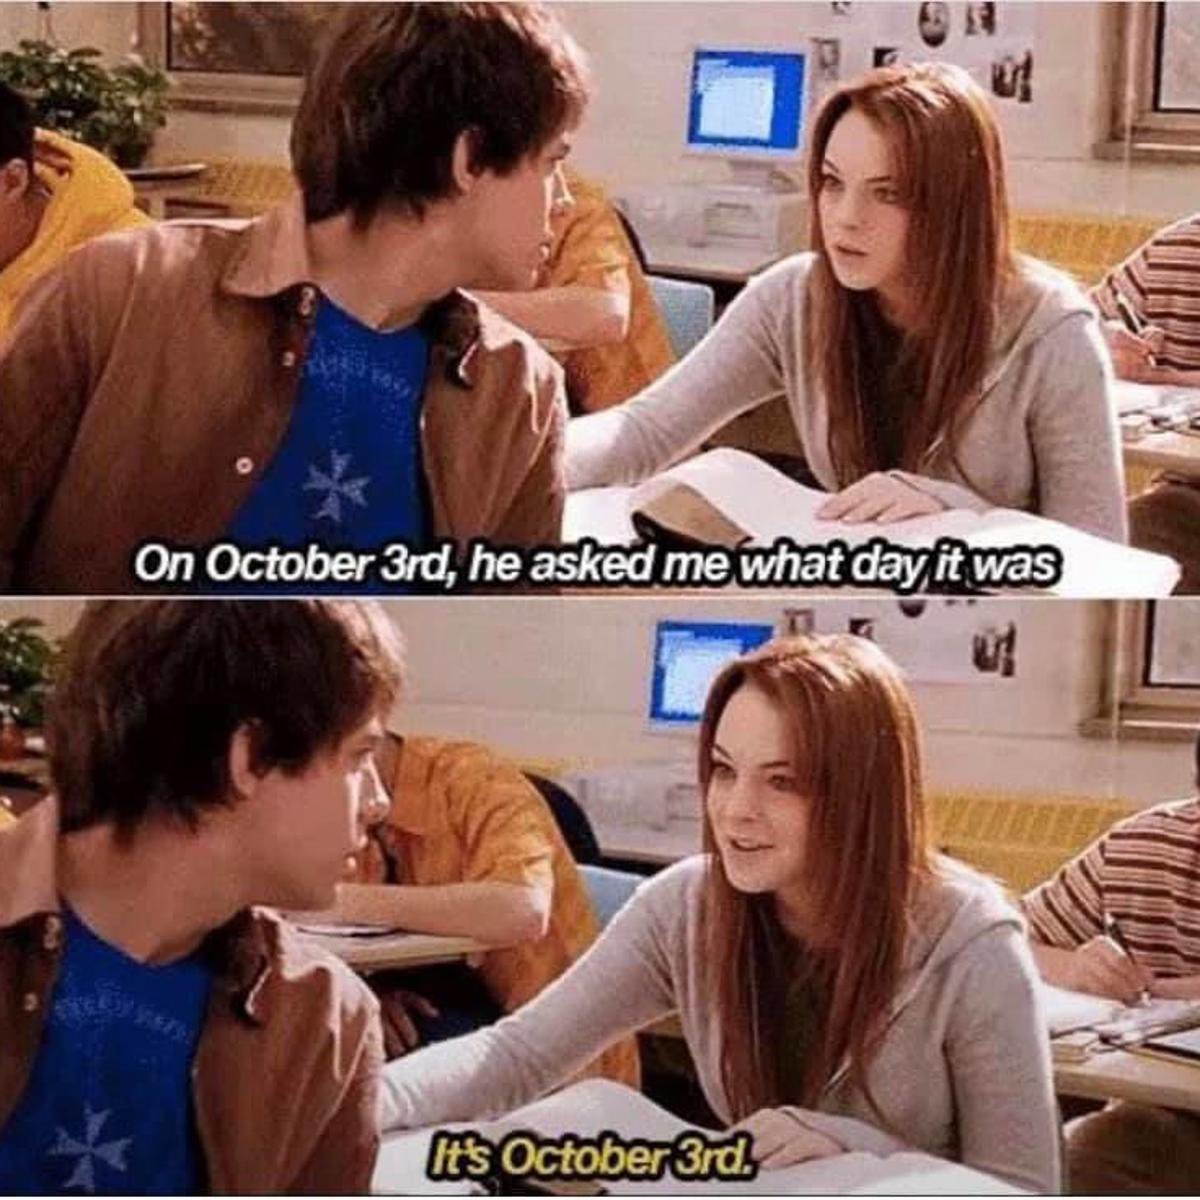 It’s October 3rd and it’s national mean girls day! #wearpink #October3rd